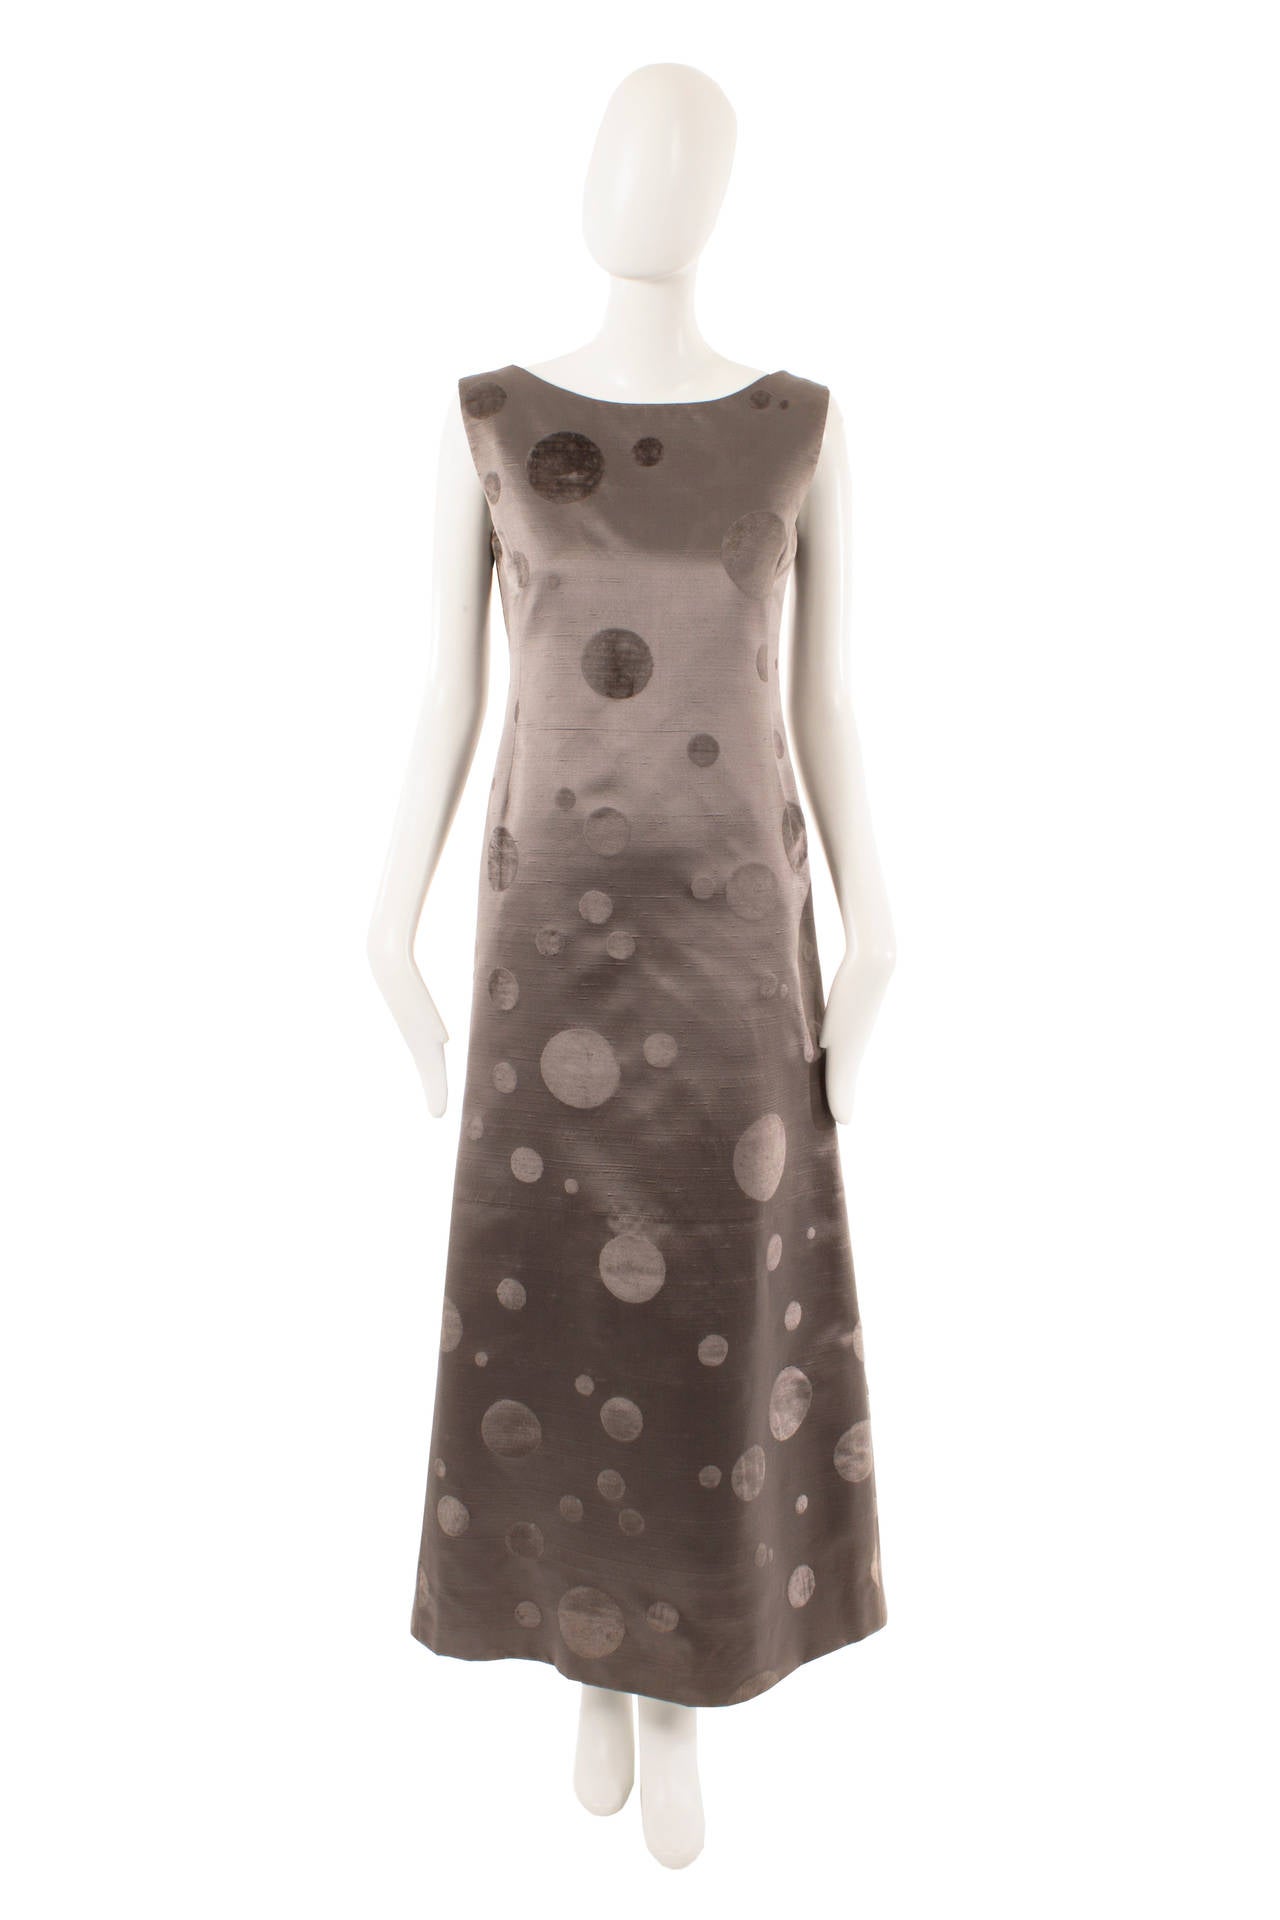 A fantastic statement piece, this Pierre Cardin full-length dress and matching capelet are perfect for black tie events. The pewter silk features flocked-effect polka dots in varying sizes, which give a subtle contrast in texture and colour while